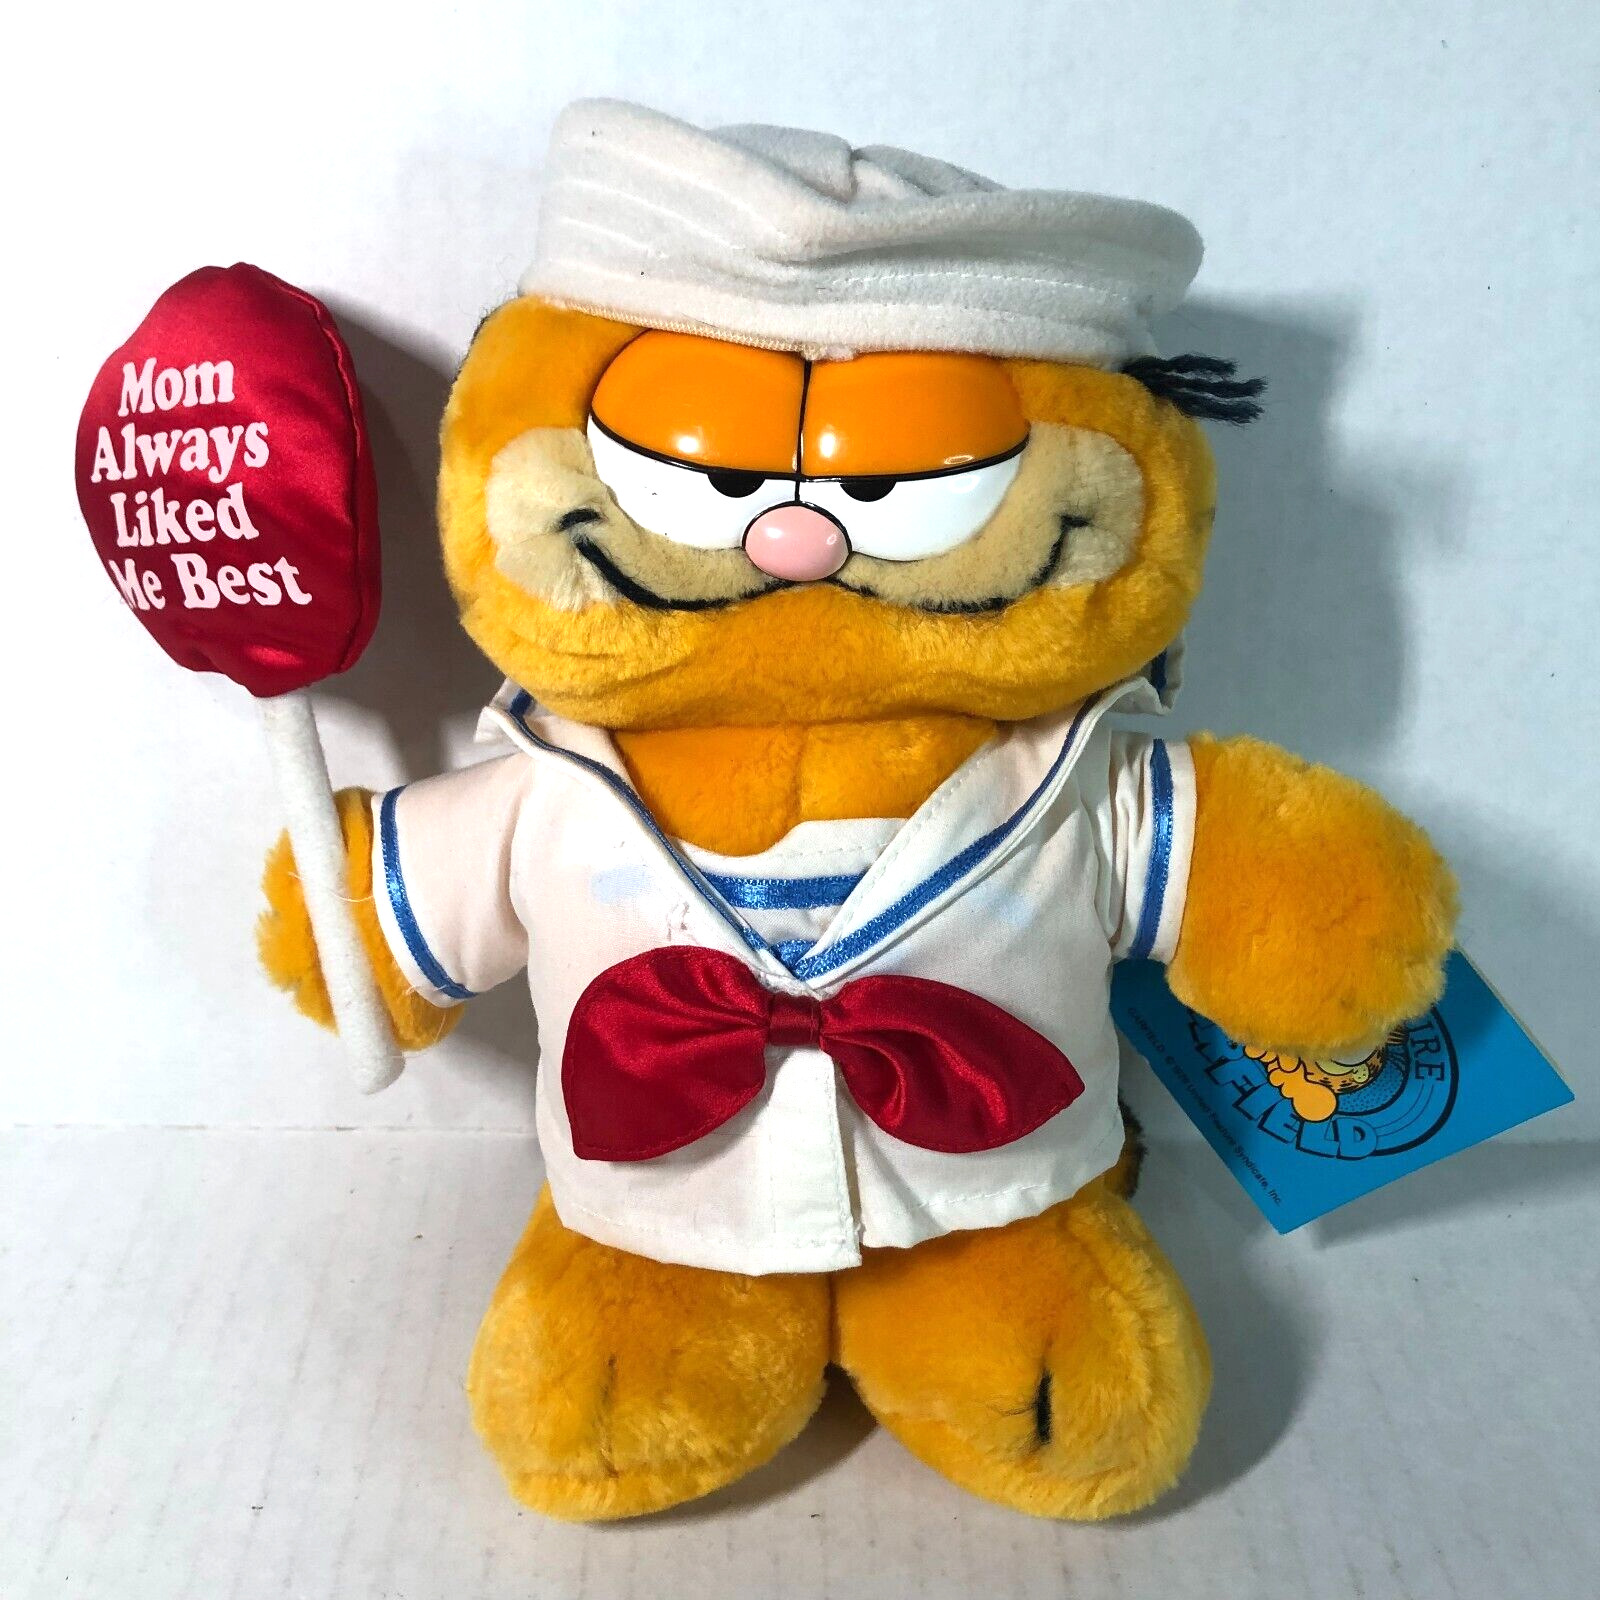 Garfield Sailor Vtg 1978 MOM ALWAYS LIKED ME BEST Vintage Plush with Tags Dakin